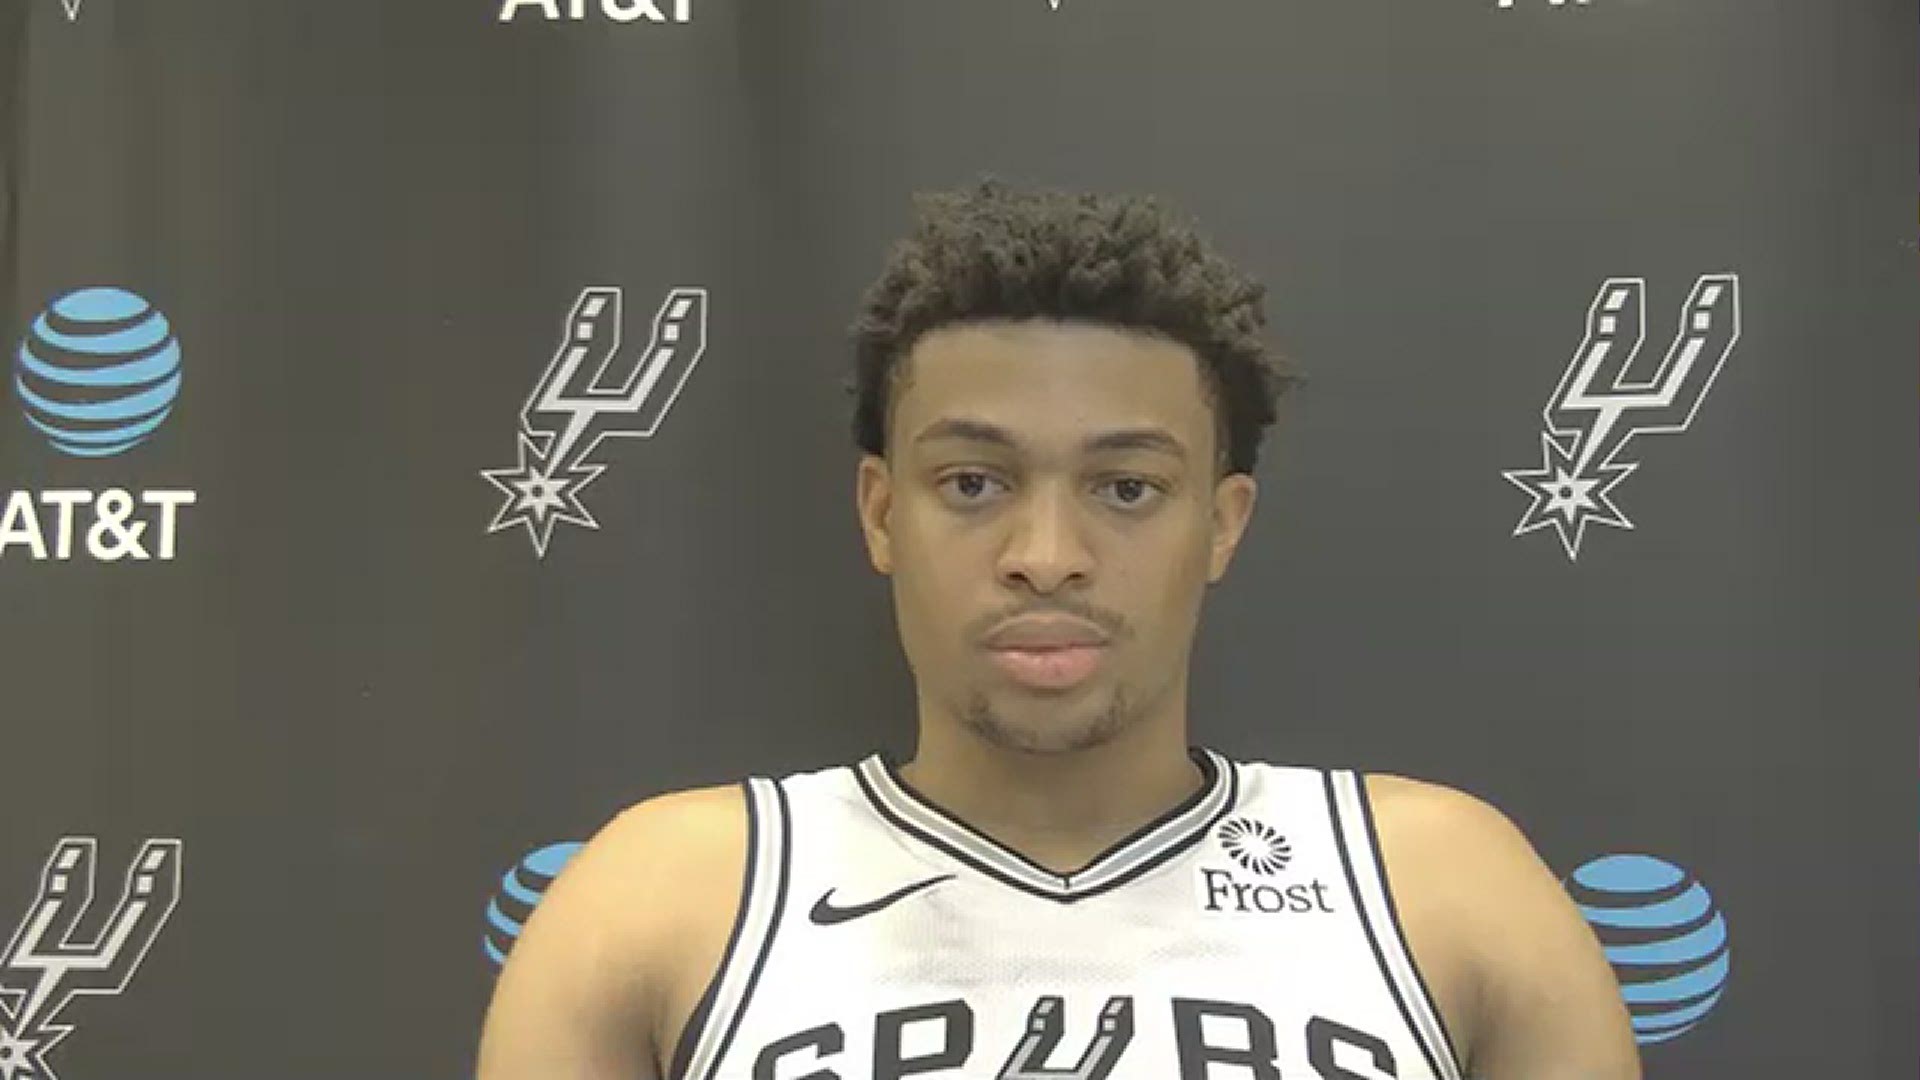 Johnson became the first Spur to put up 20 and 20 since Tim Duncan in 2013, and said it just came down to wanting it.